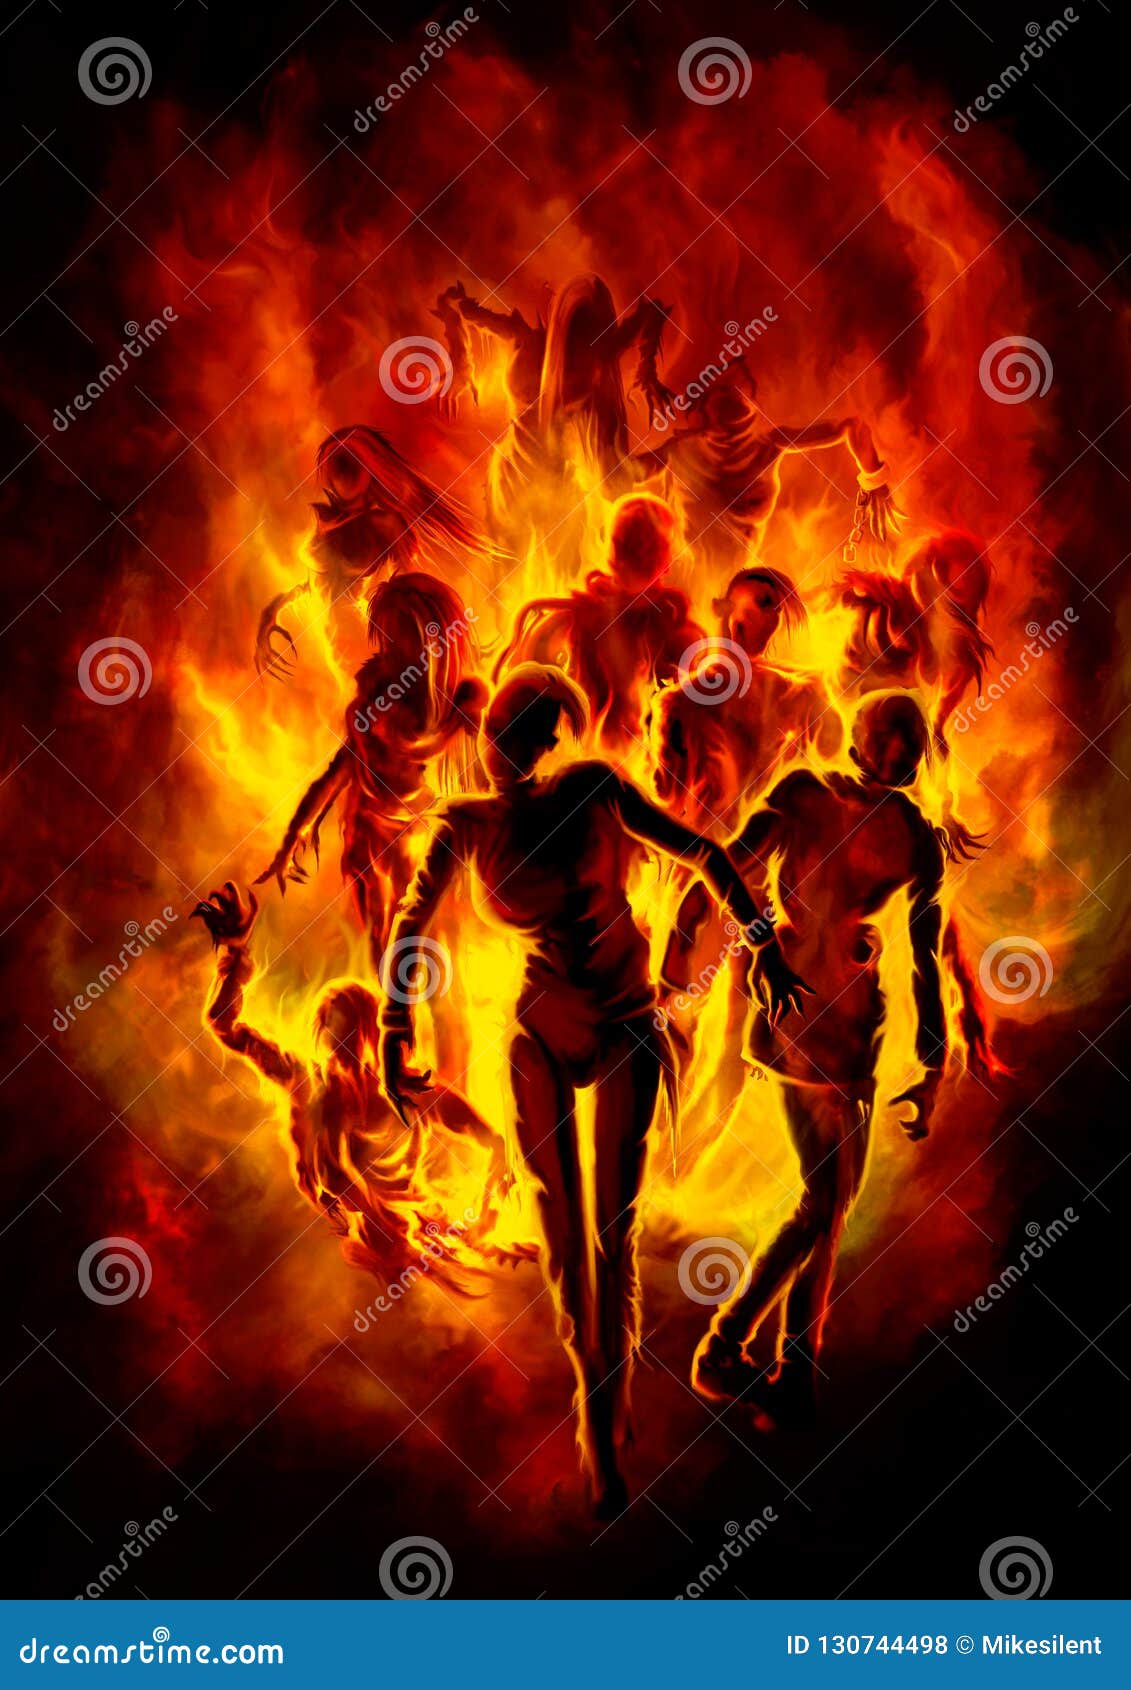 [Mission JL] L'infection Burning-zombies-illustration-crowd-fire-130744498